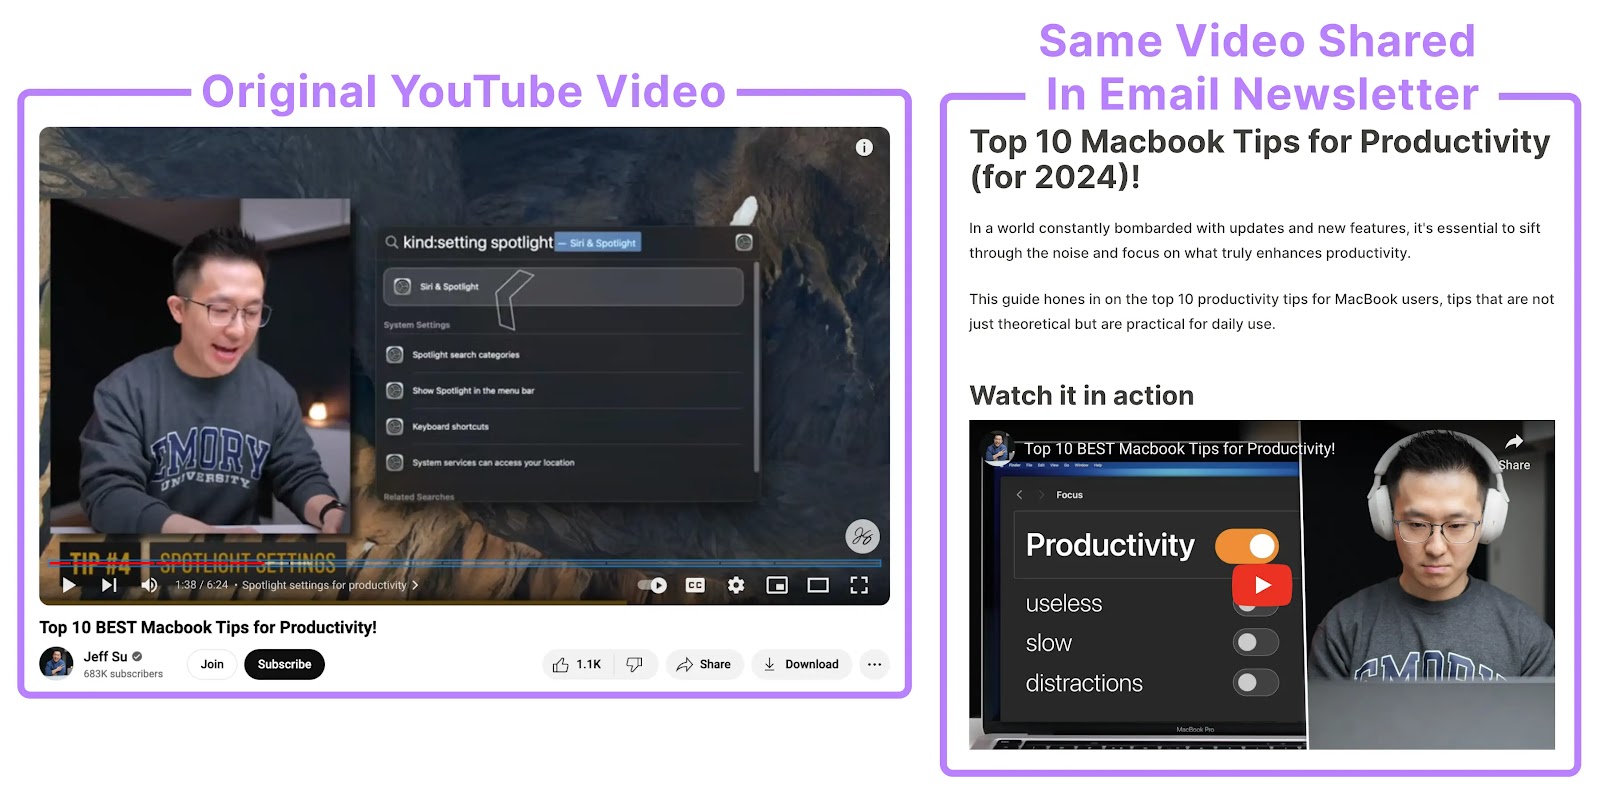 Original YouTube video (left) and the aforesaid  video shared successful  a newsletter (right)